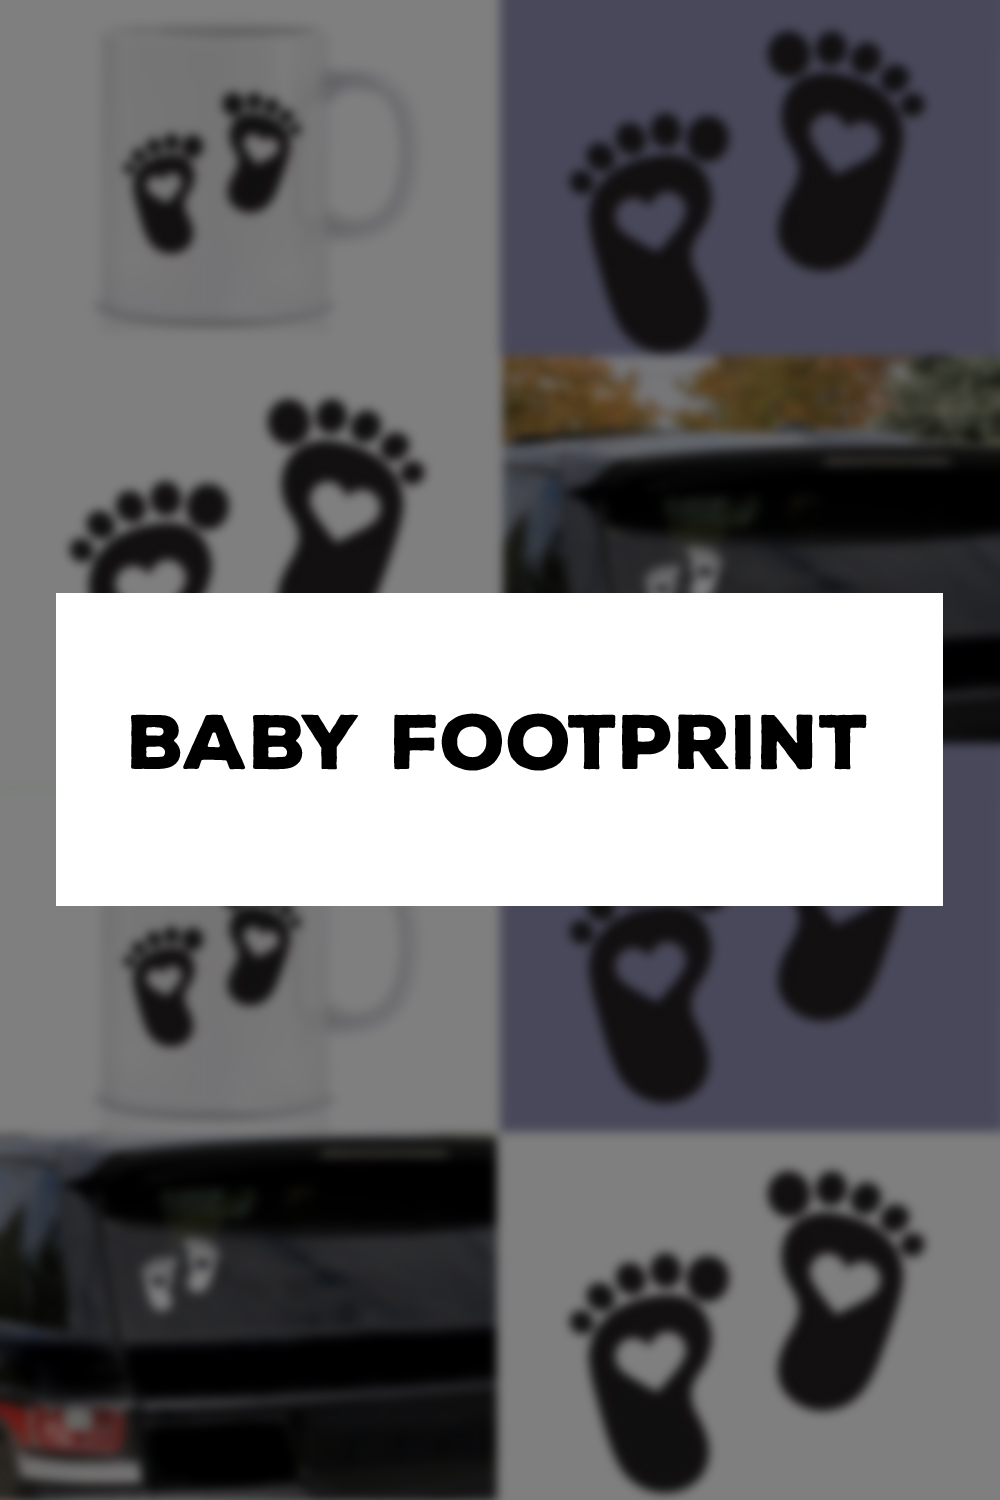 Footprint baby feet image preview.